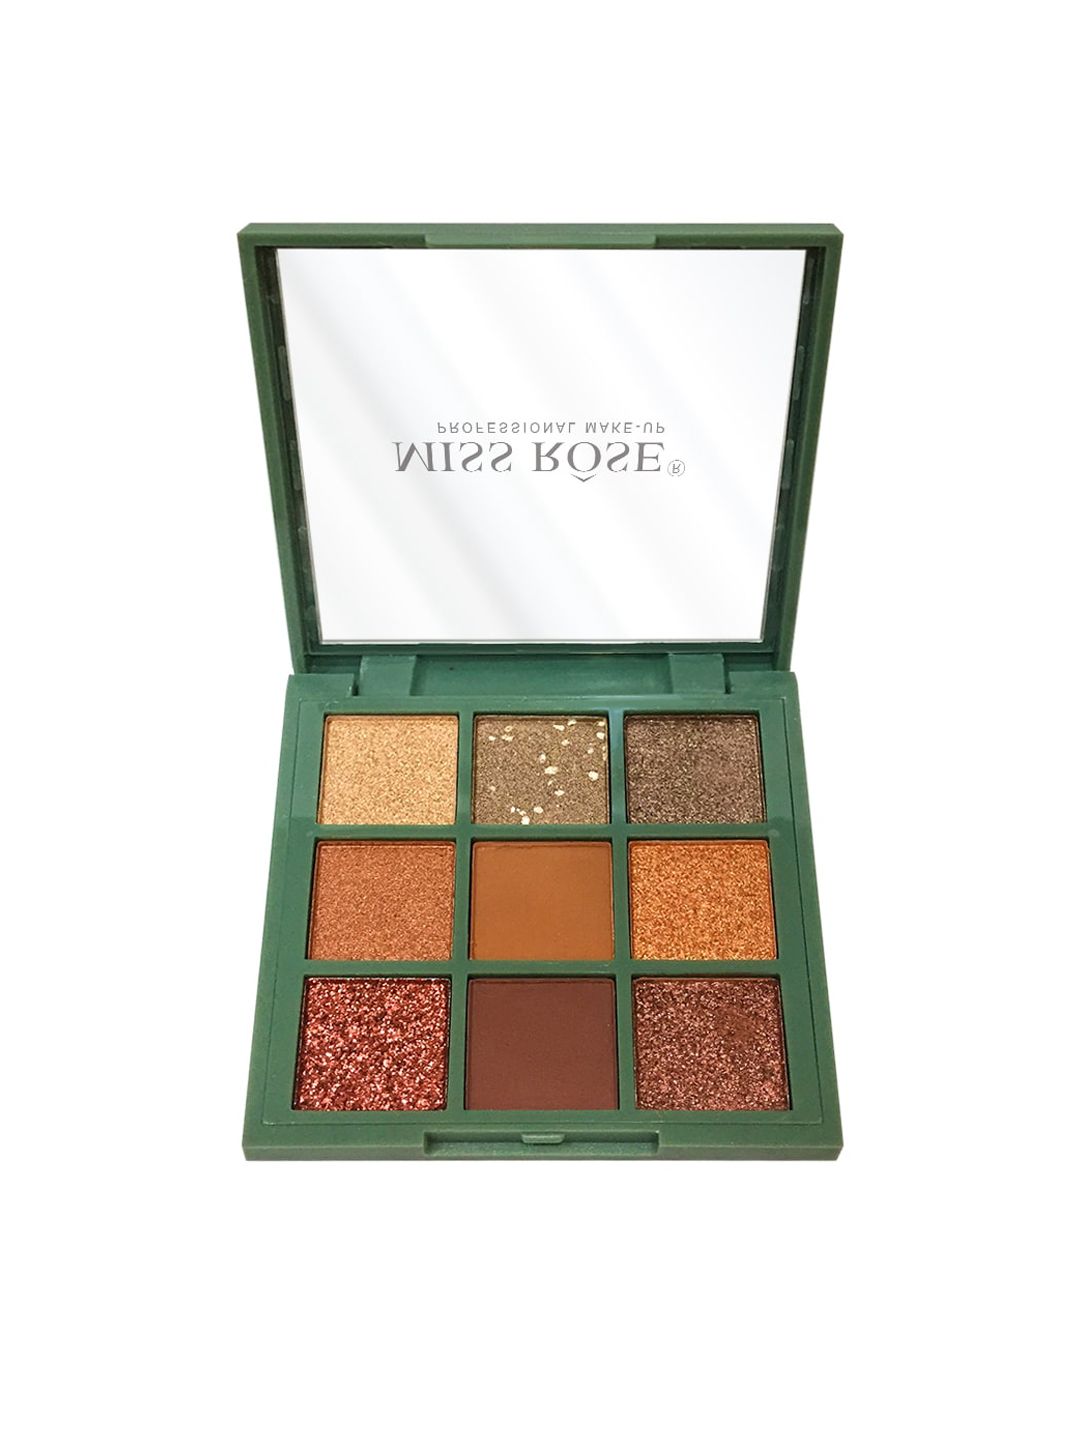 MISS ROSE 9 Color Matte & Glitter Eyeshadow Palette 7001-123 Price in India